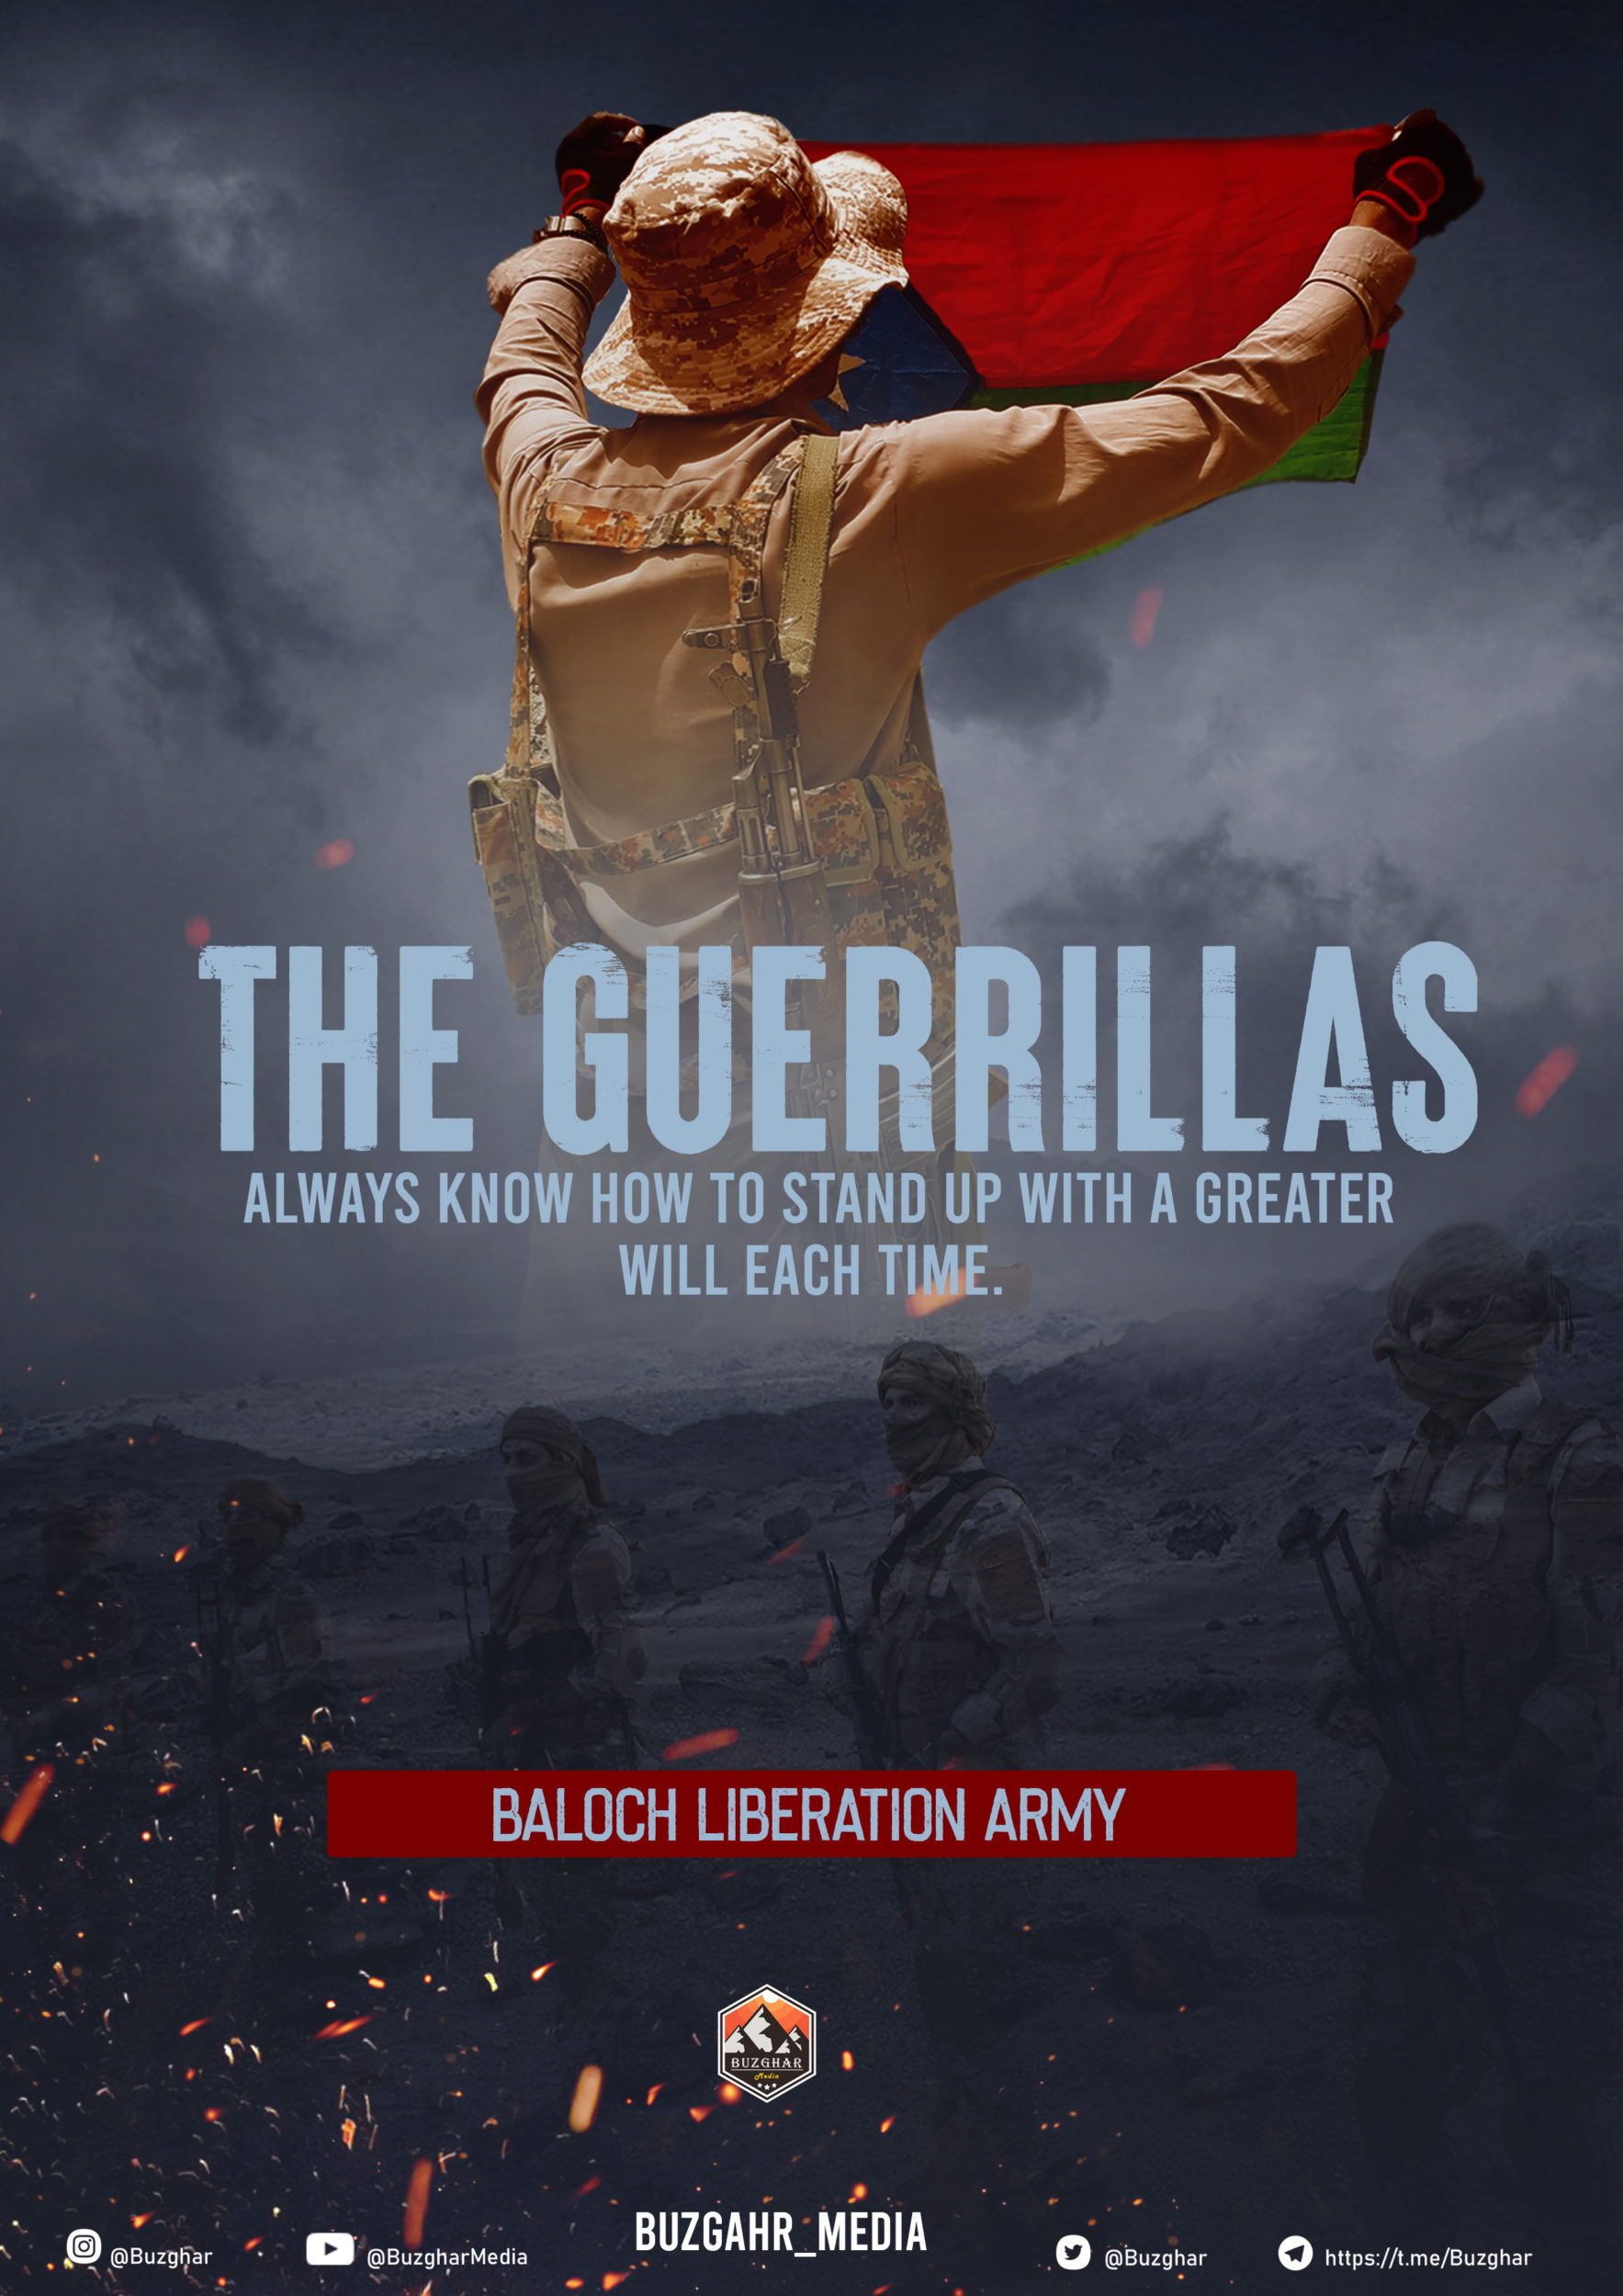 Baloch Liberation Army (BLA) Published Poster Featuring 'Guerrillas'